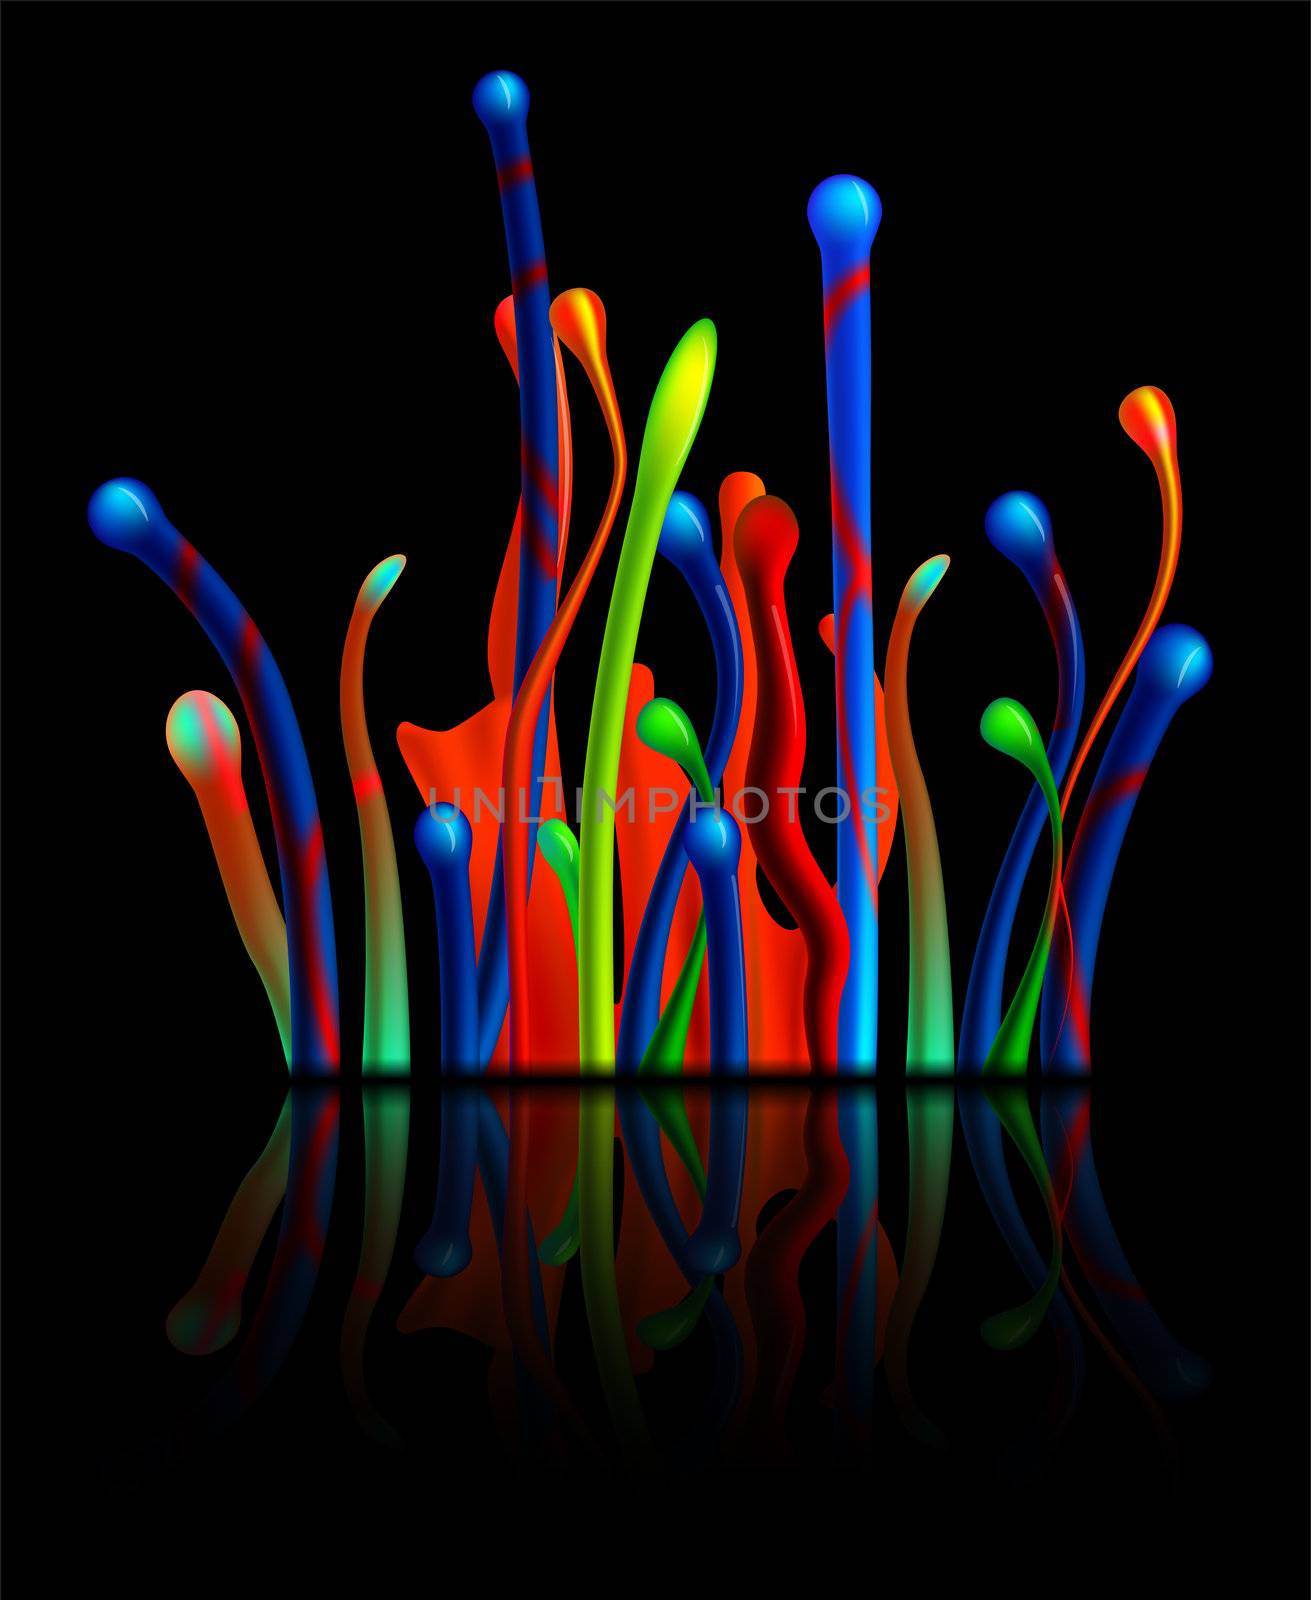 Colorful Paint Splash On Black by ankarb